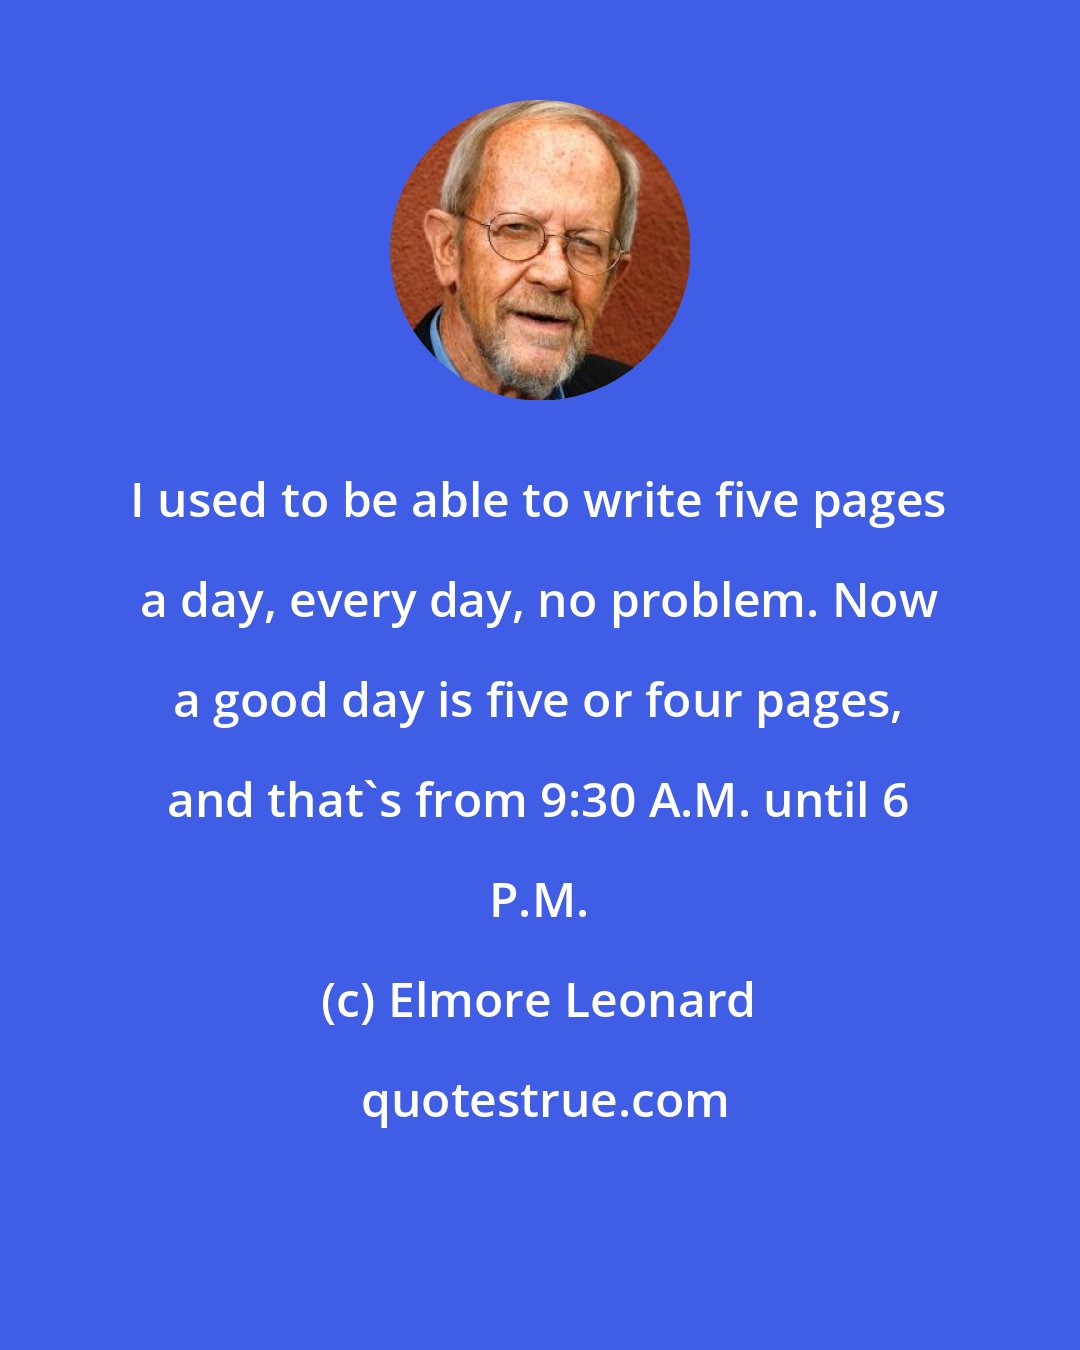 Elmore Leonard: I used to be able to write five pages a day, every day, no problem. Now a good day is five or four pages, and that's from 9:30 A.M. until 6 P.M.